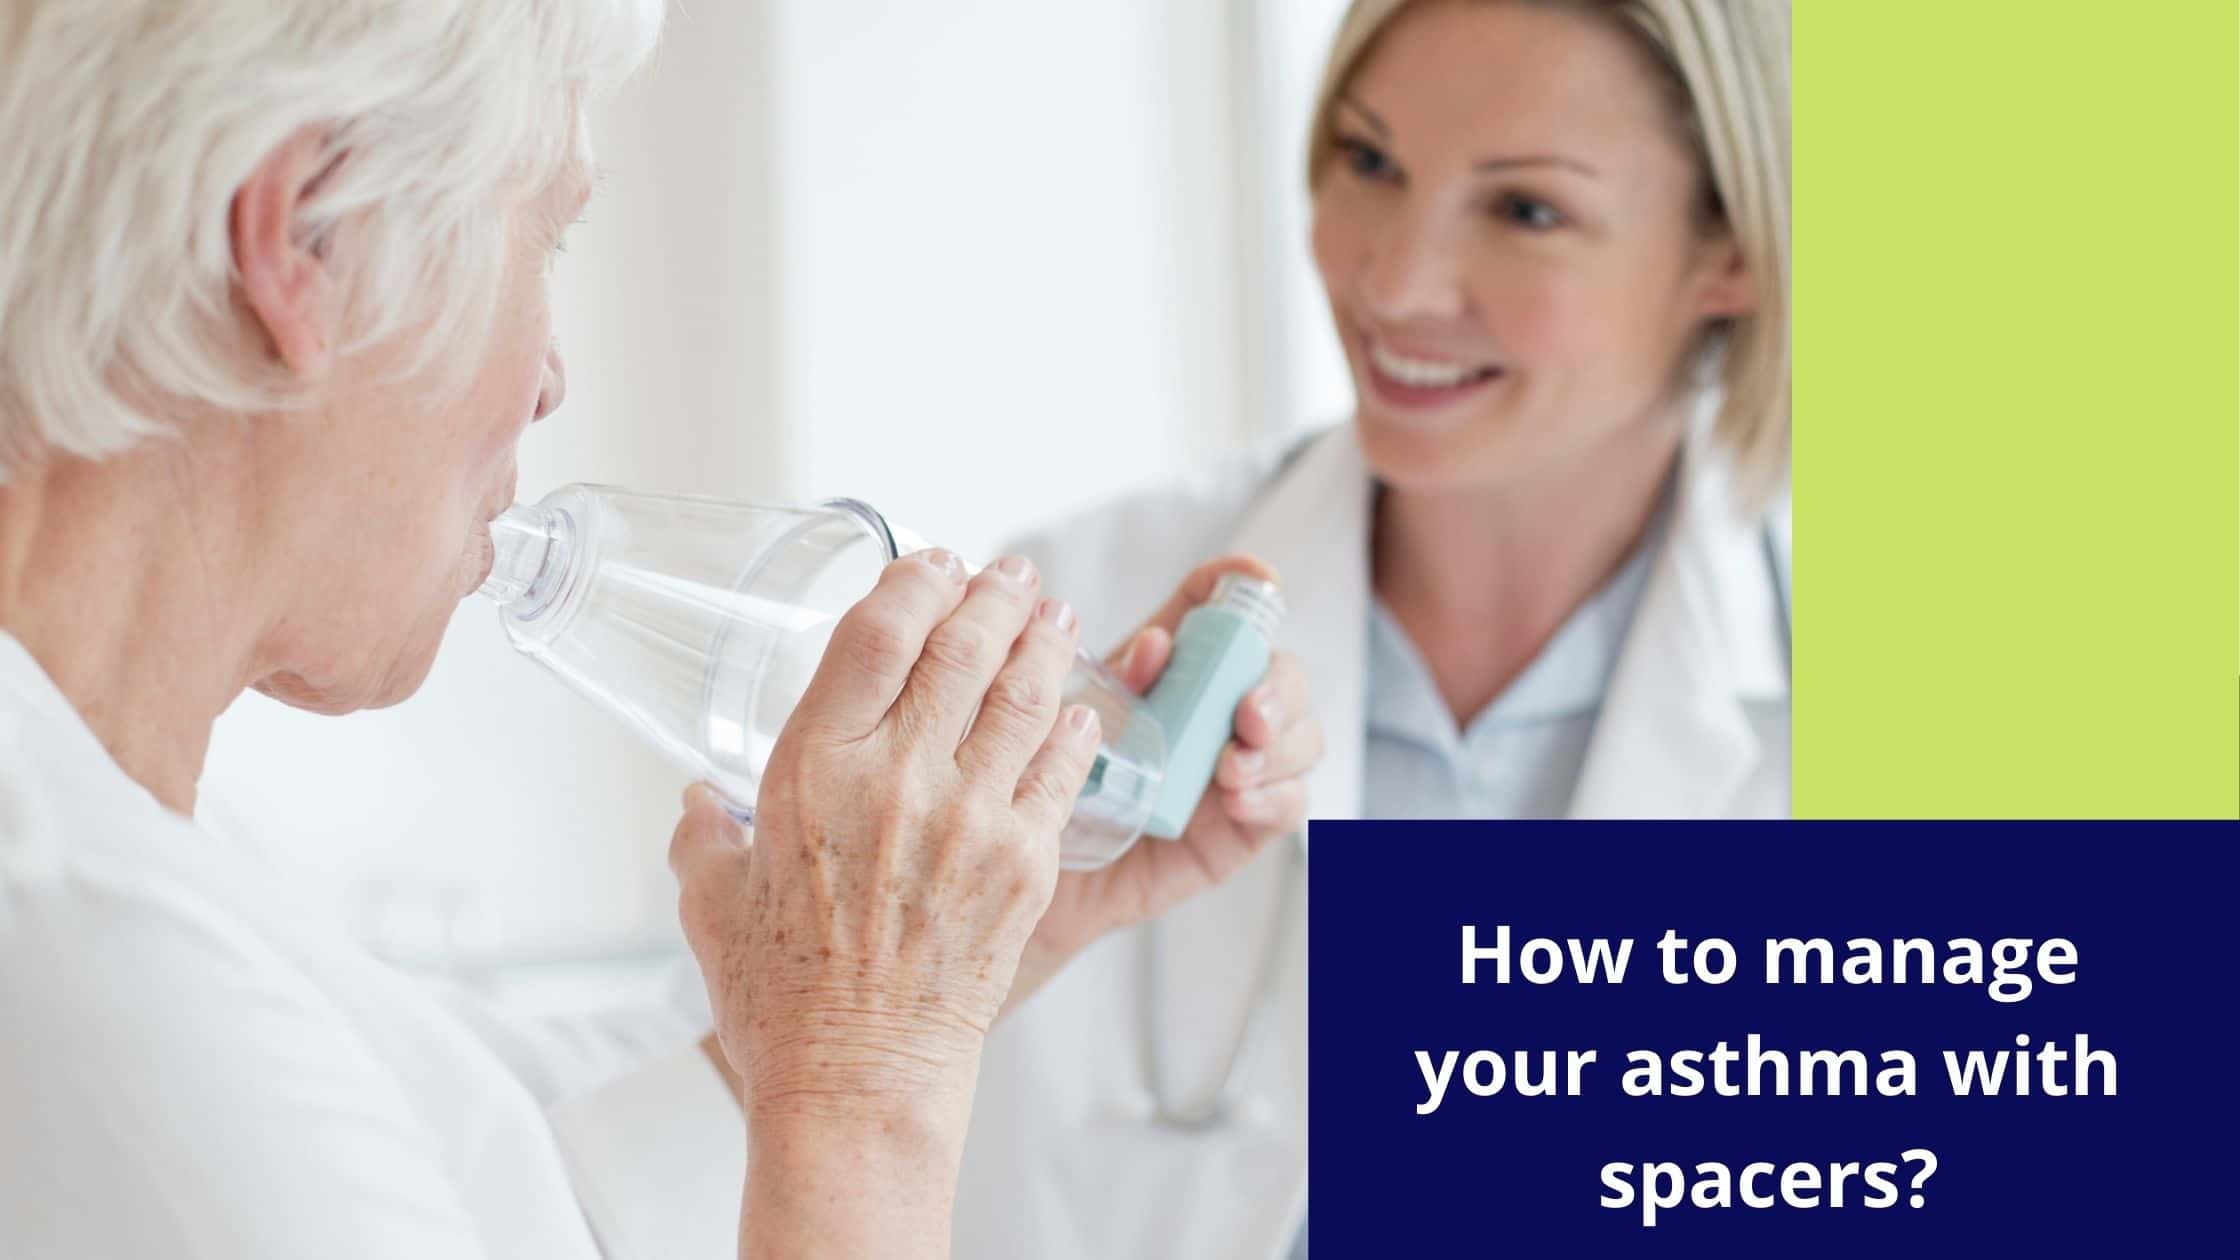 How to Manage Your Asthma with Spacers